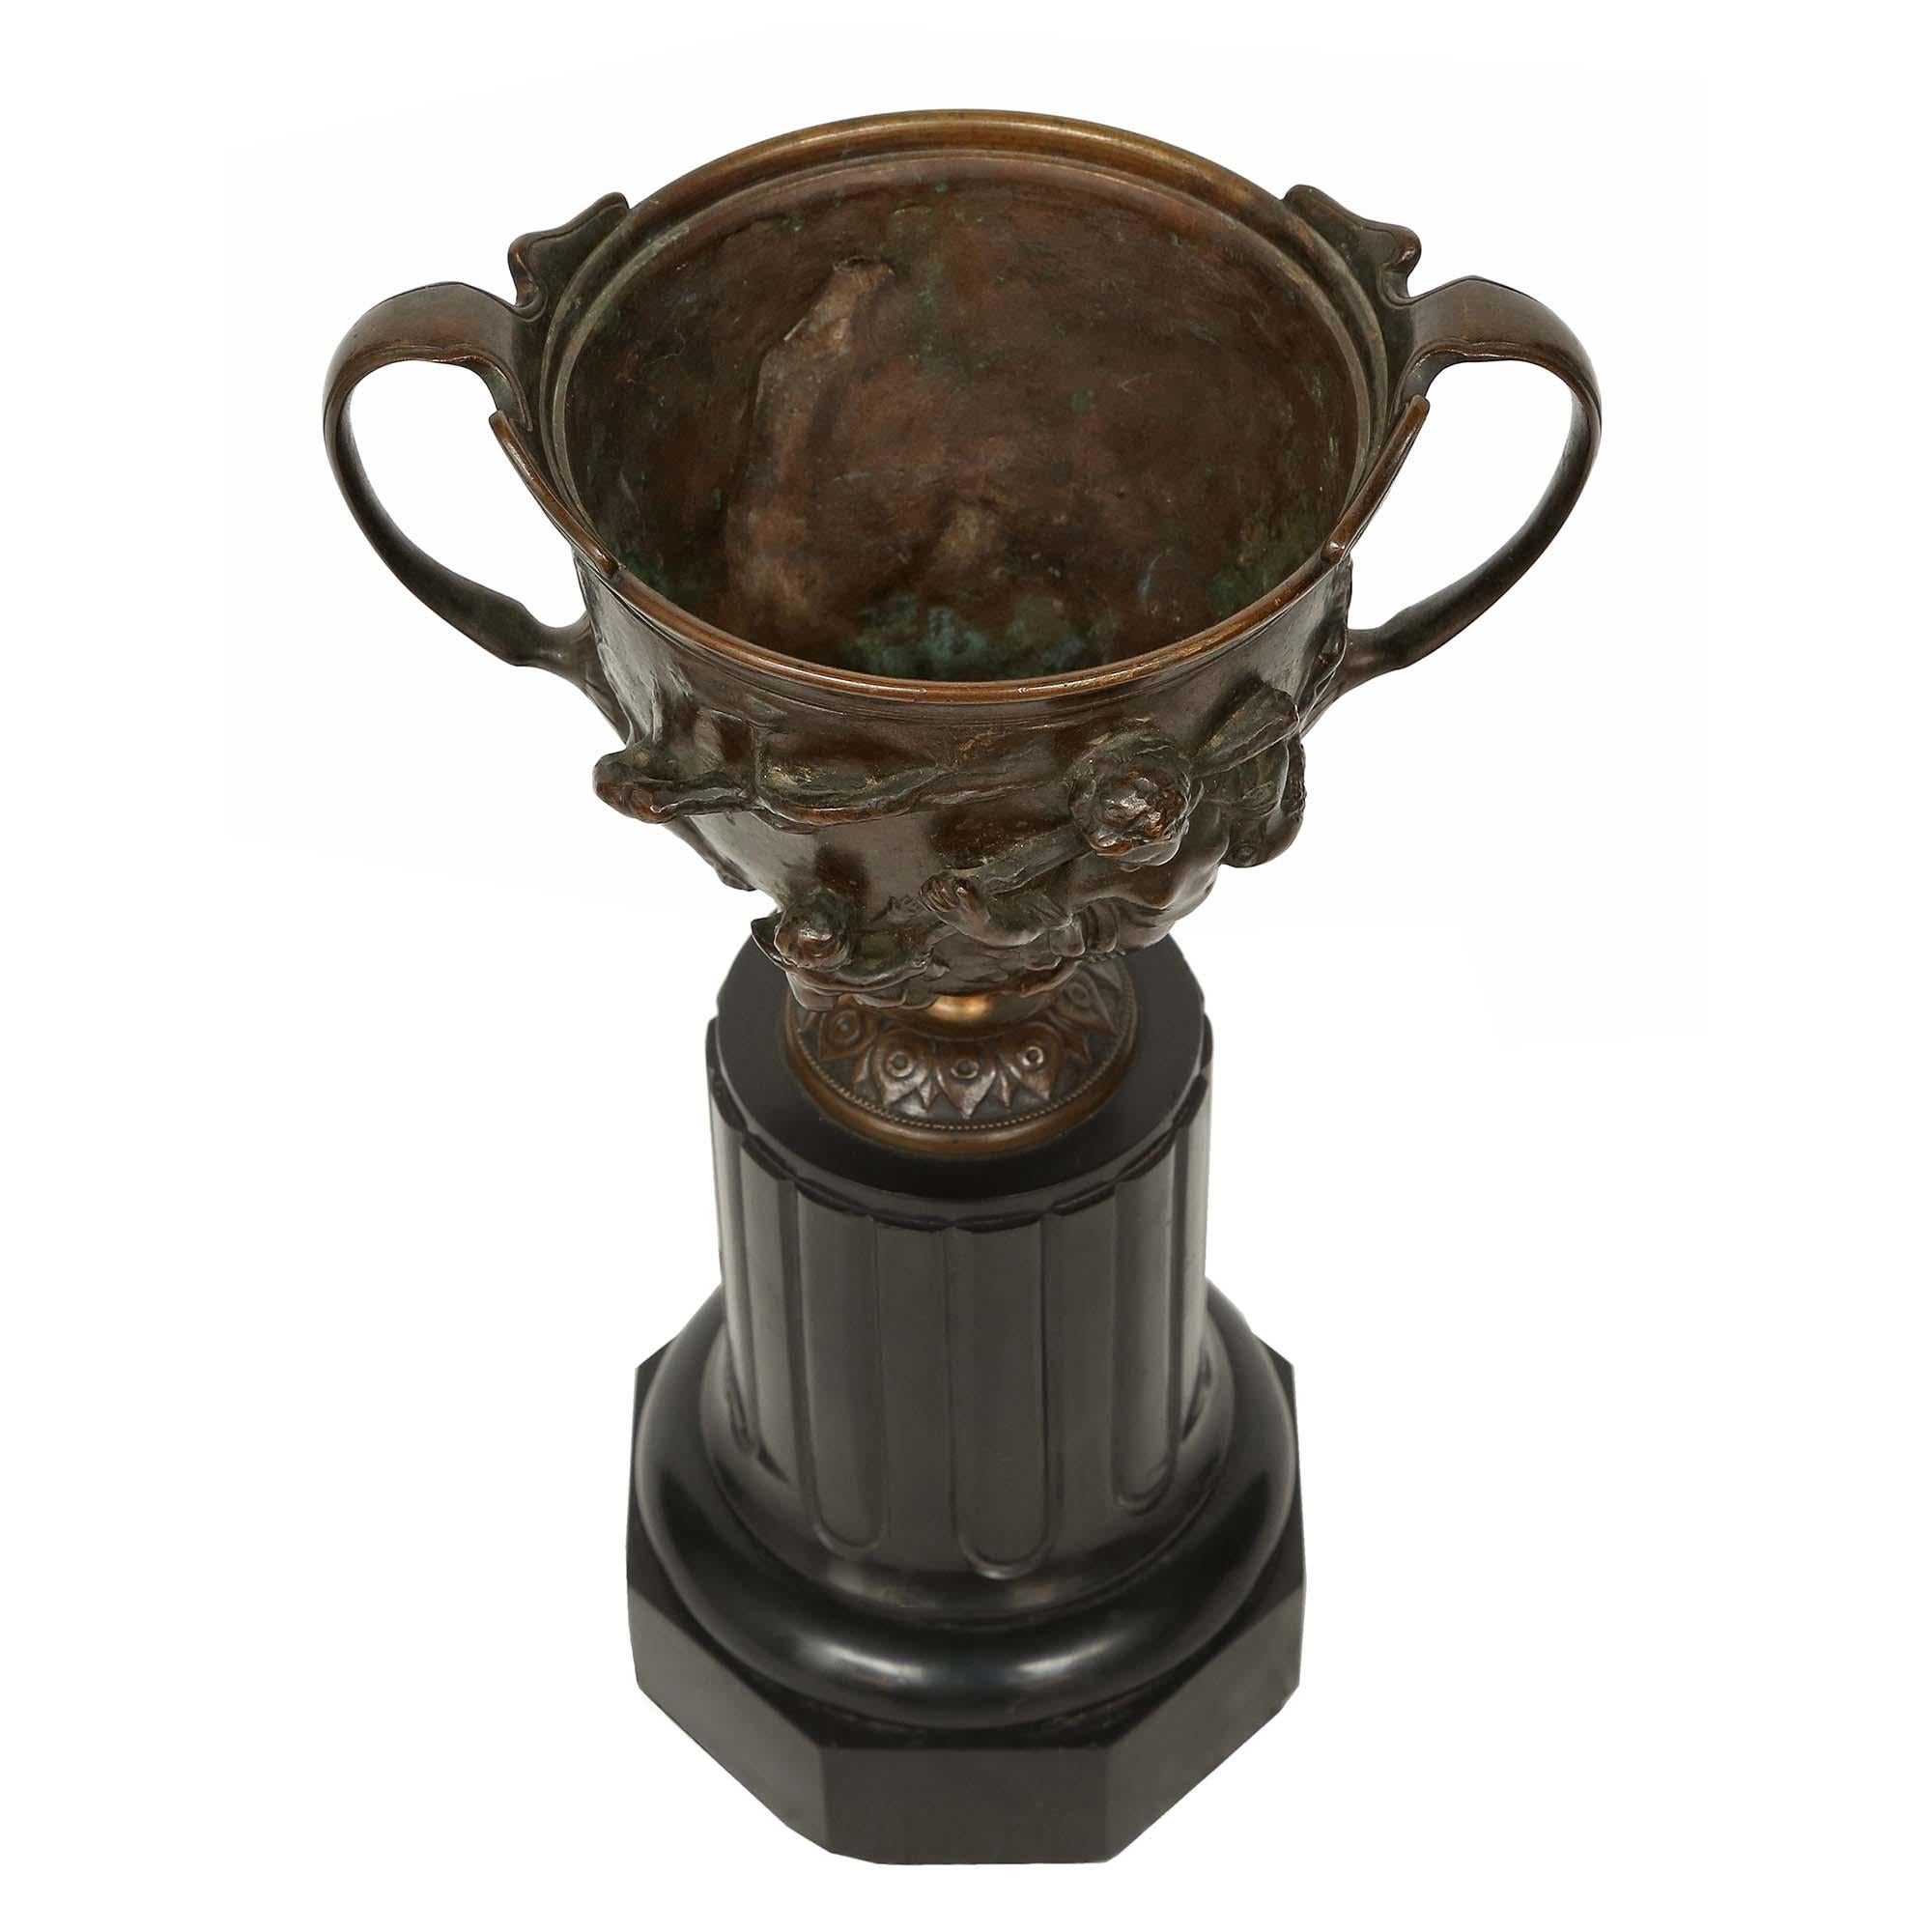 A very attractive pair of French 19th century patinated bronze tazzas which are raised by a high reeded column black Belgian marble base with an octagonal shaped plinth. Above the base is a circular support with a water leaf design. The tazzas are